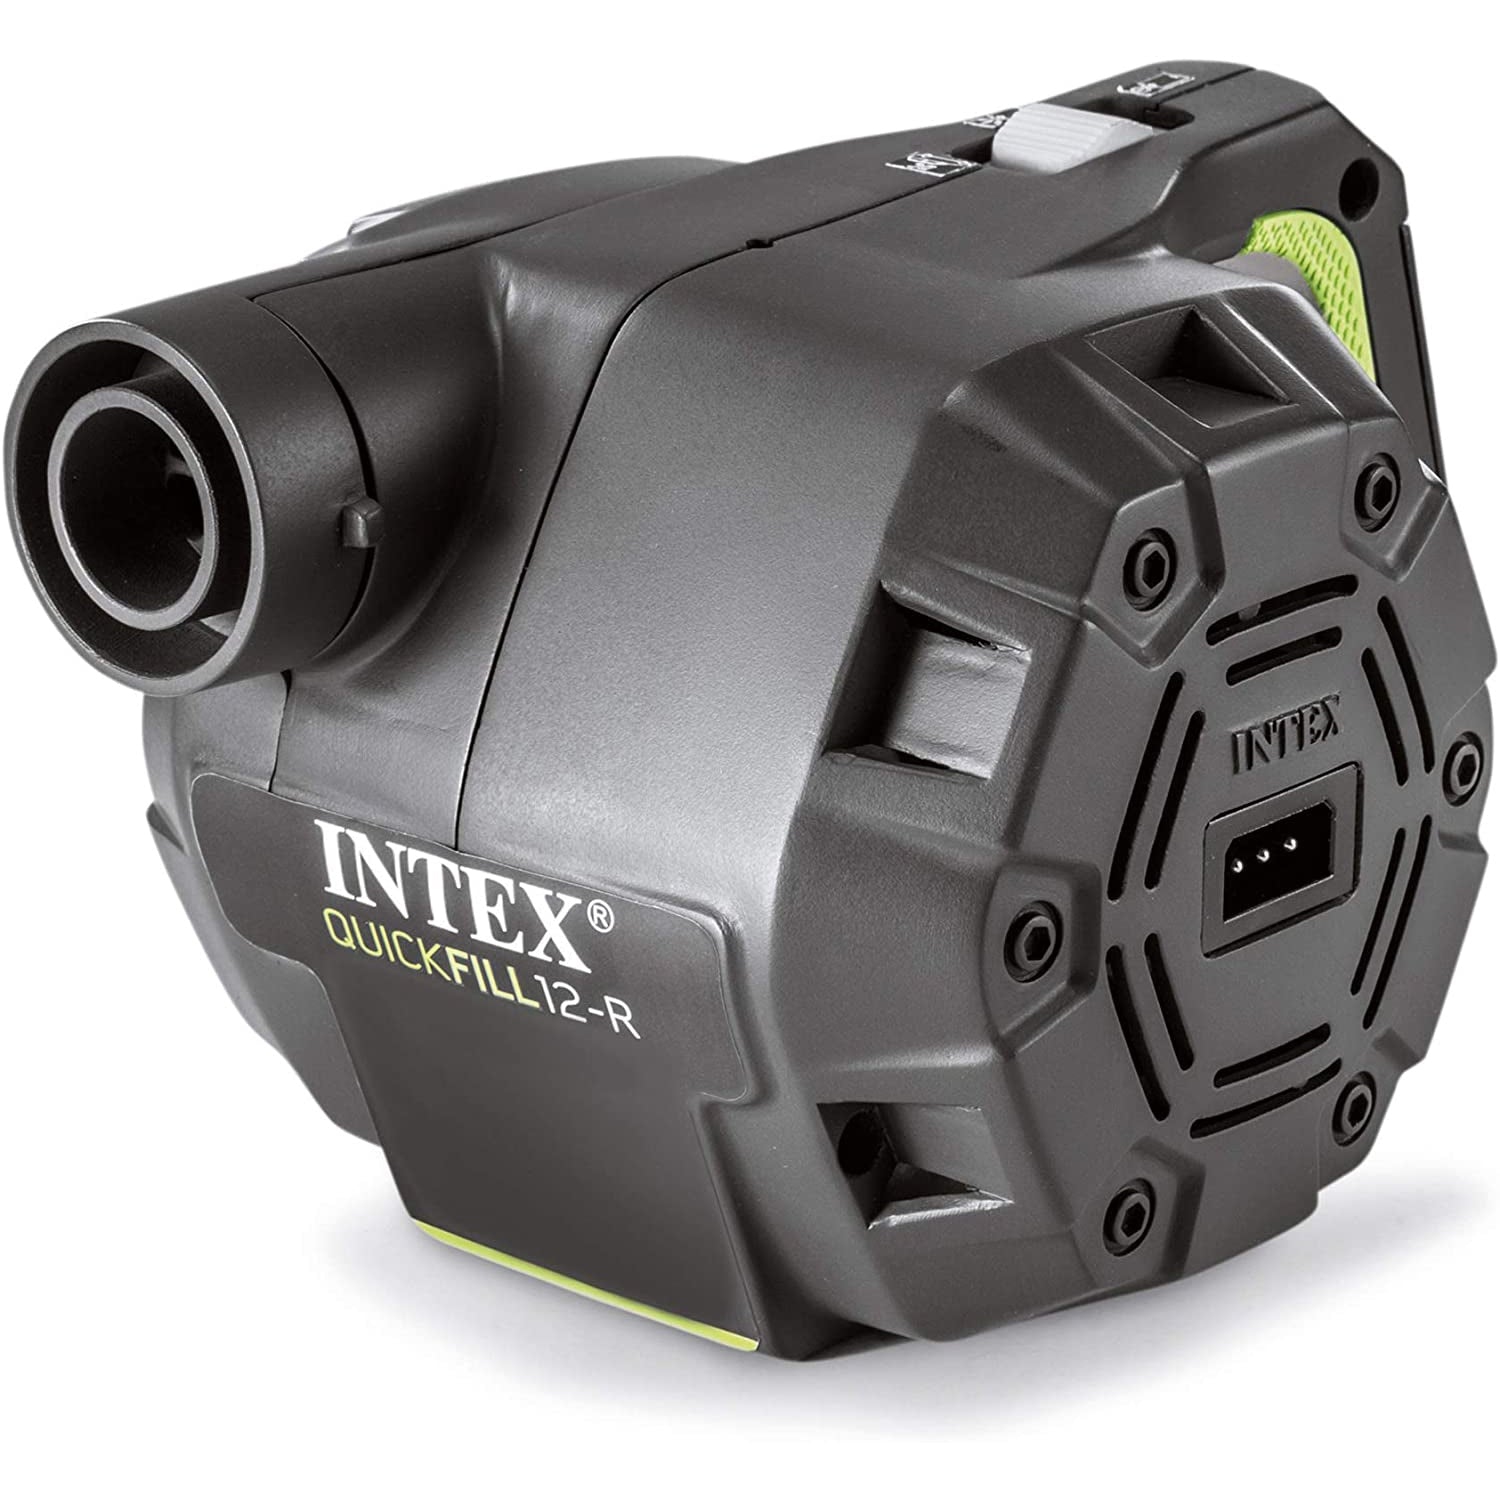 Intex - Rechargeable Electric Air Pump, 3 Interchangeable Nozzles, Indoor or Outdoor Use